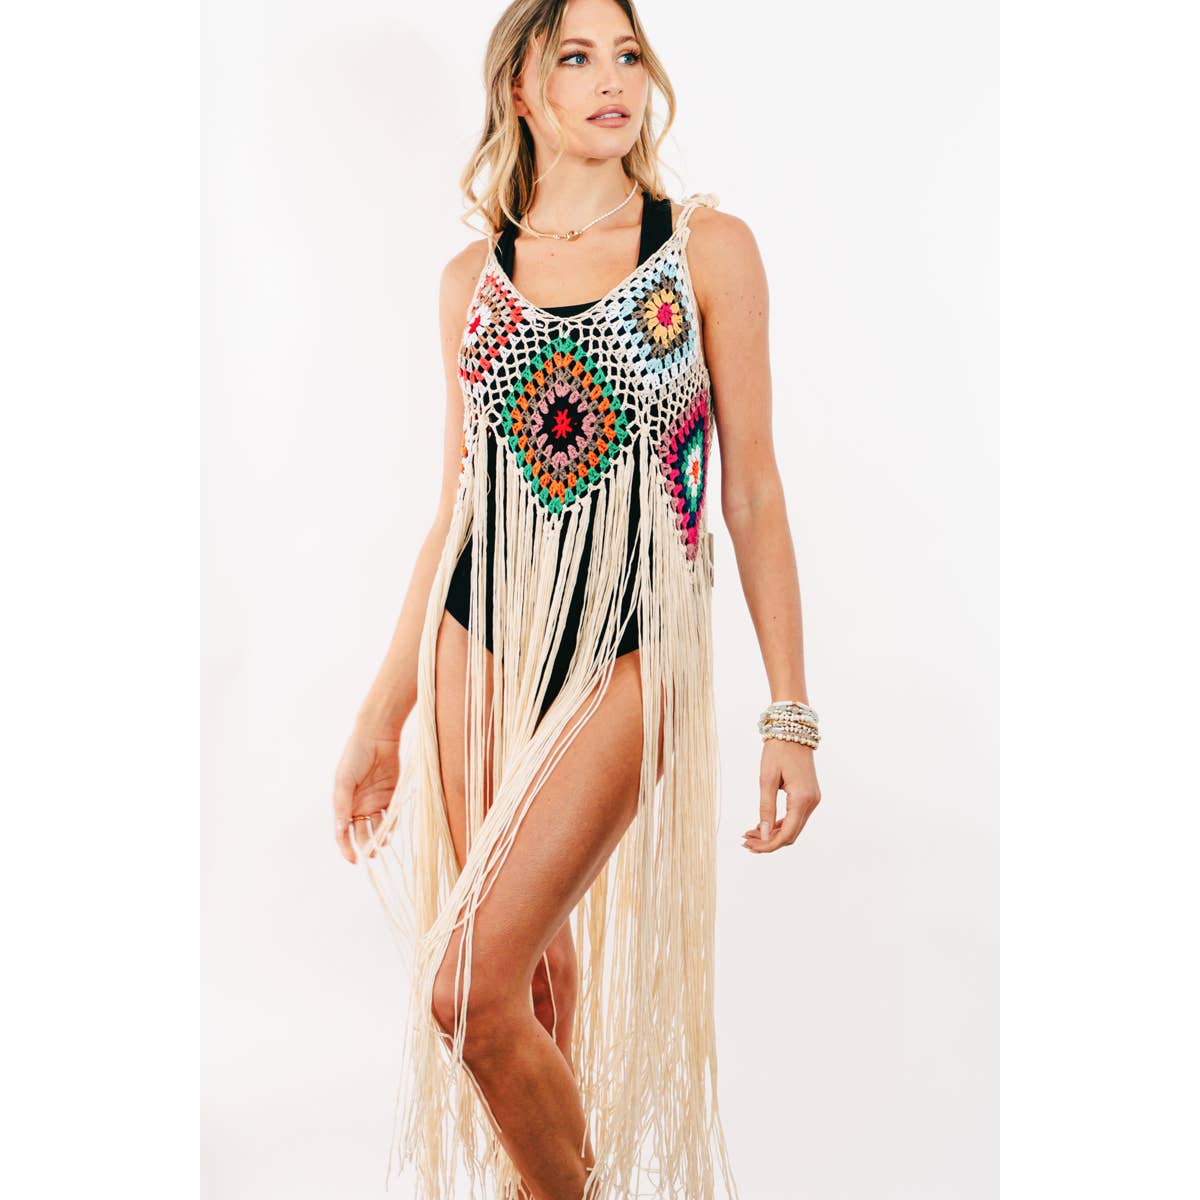 Beach Cover Ups, Kaftans, Sarongs & Swimsuit Covers